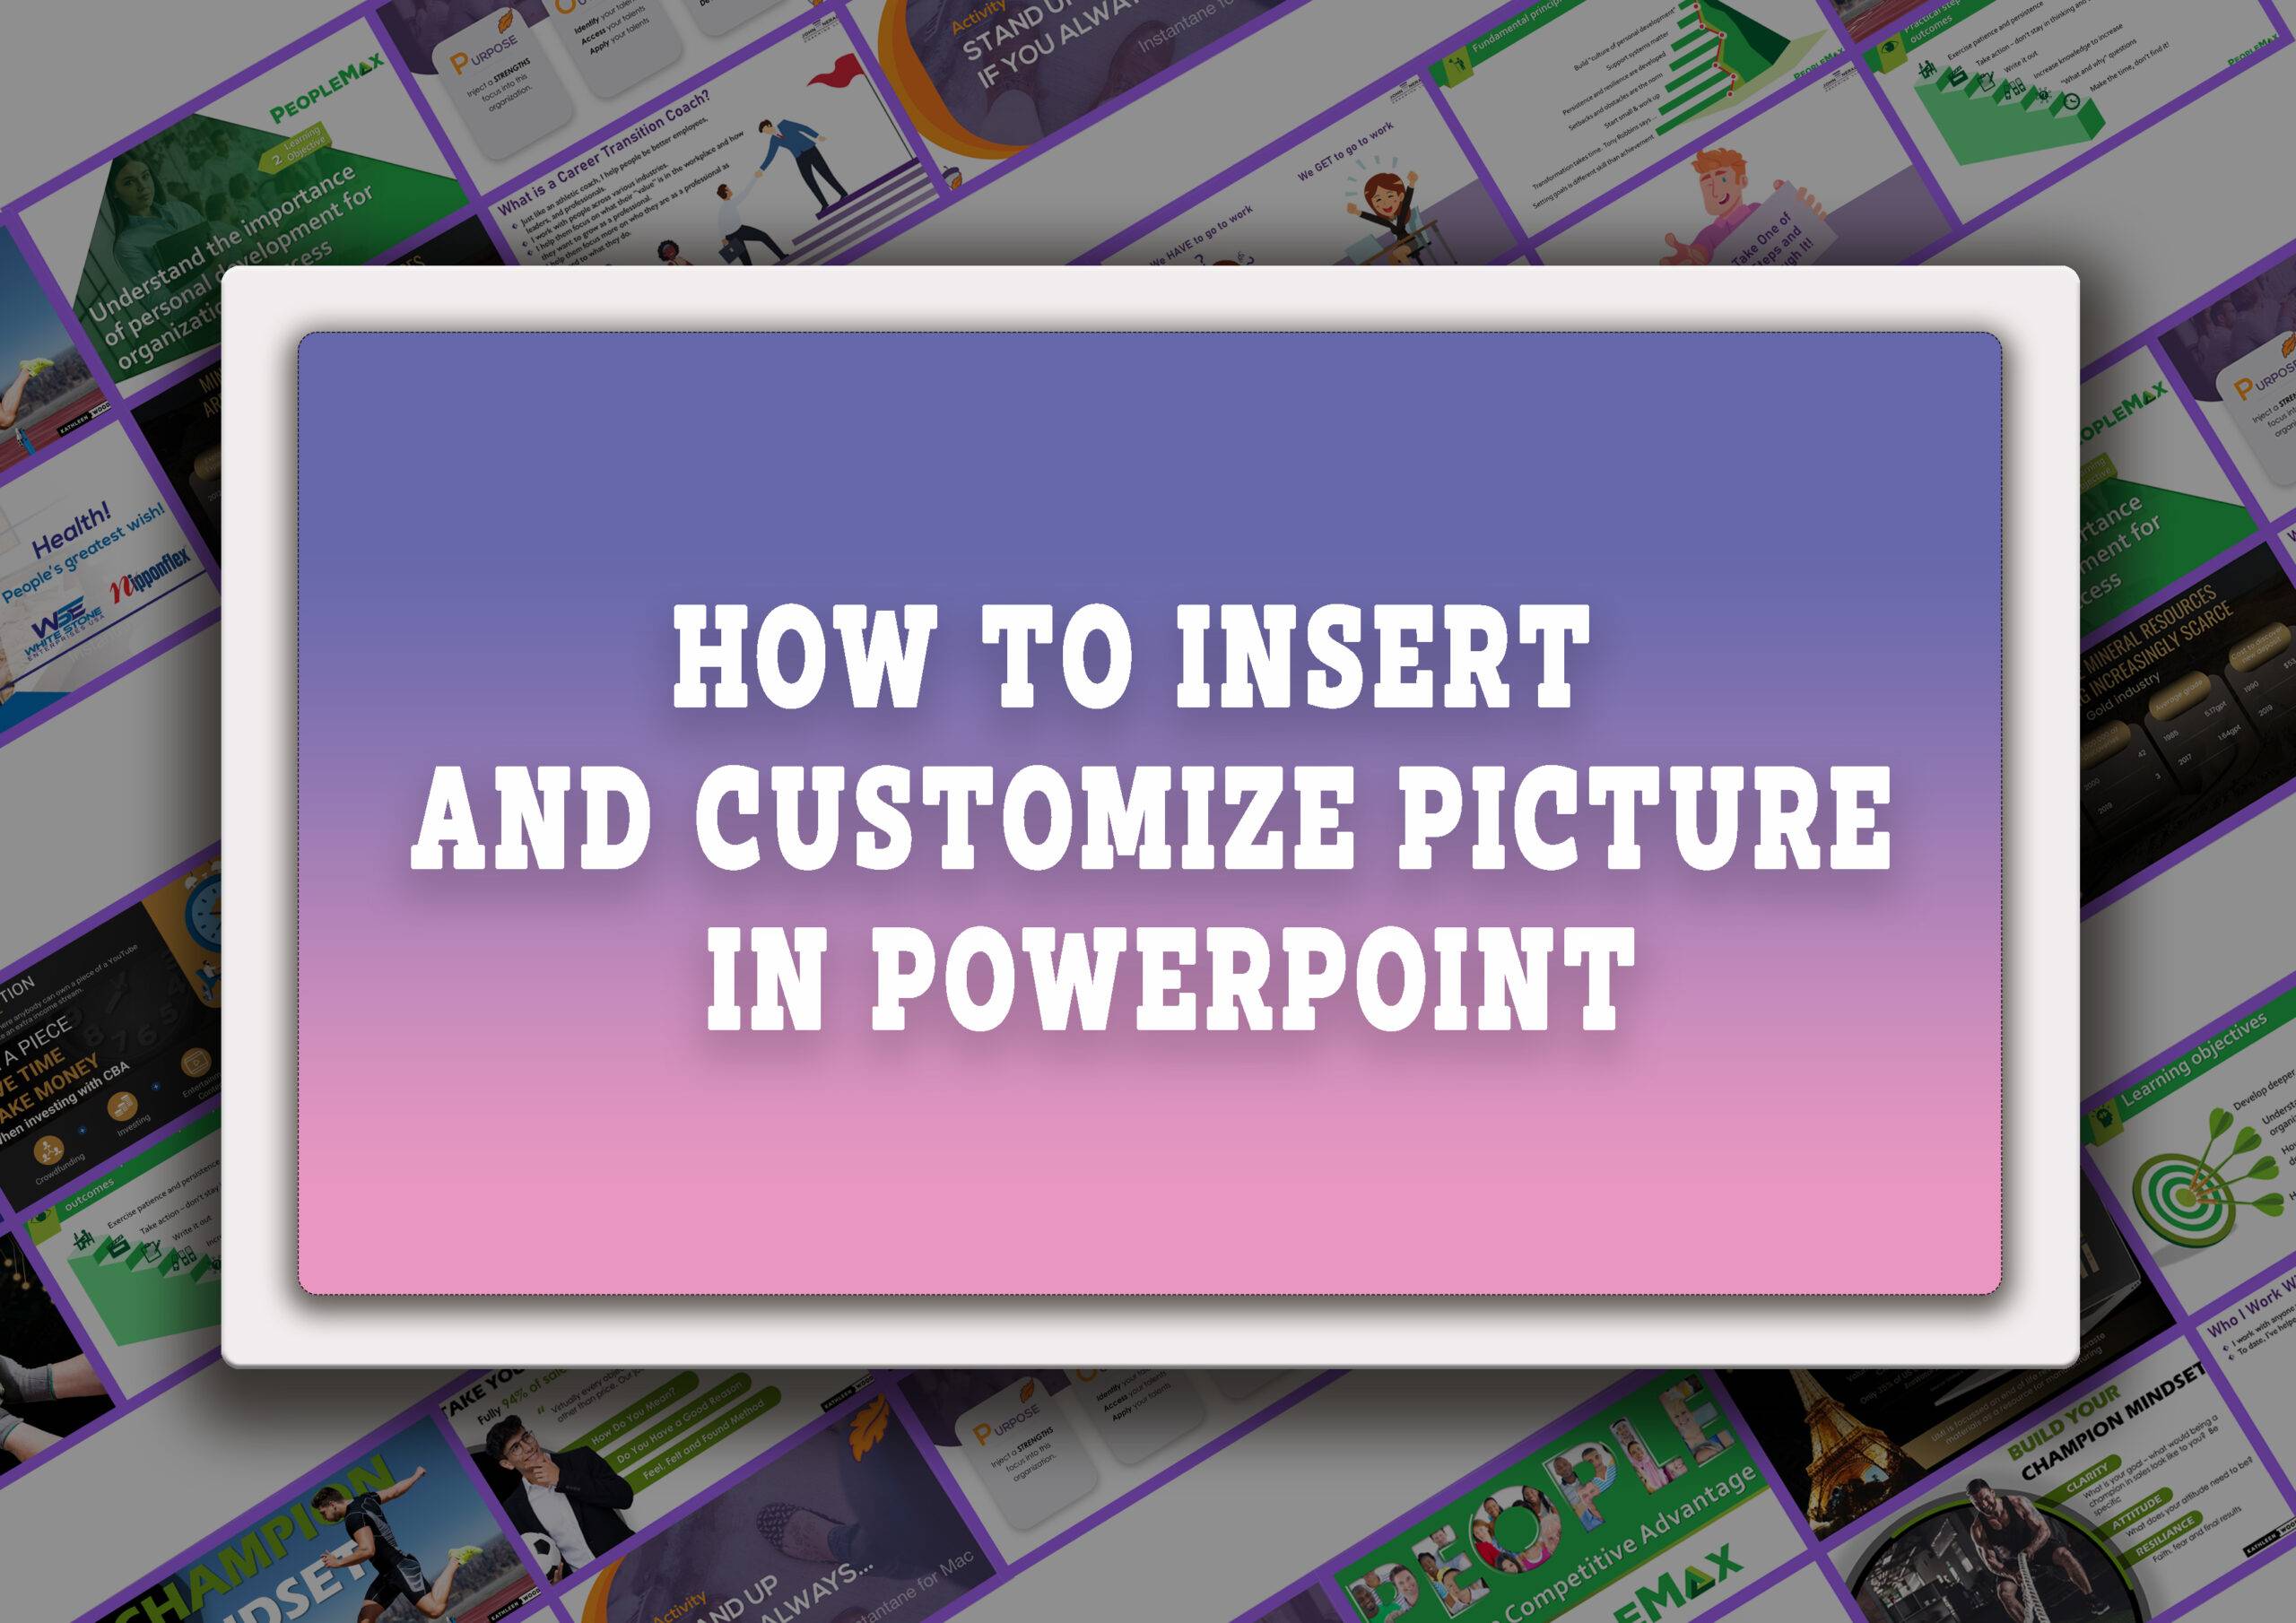 Inserting and customizing picture in PowerPoint